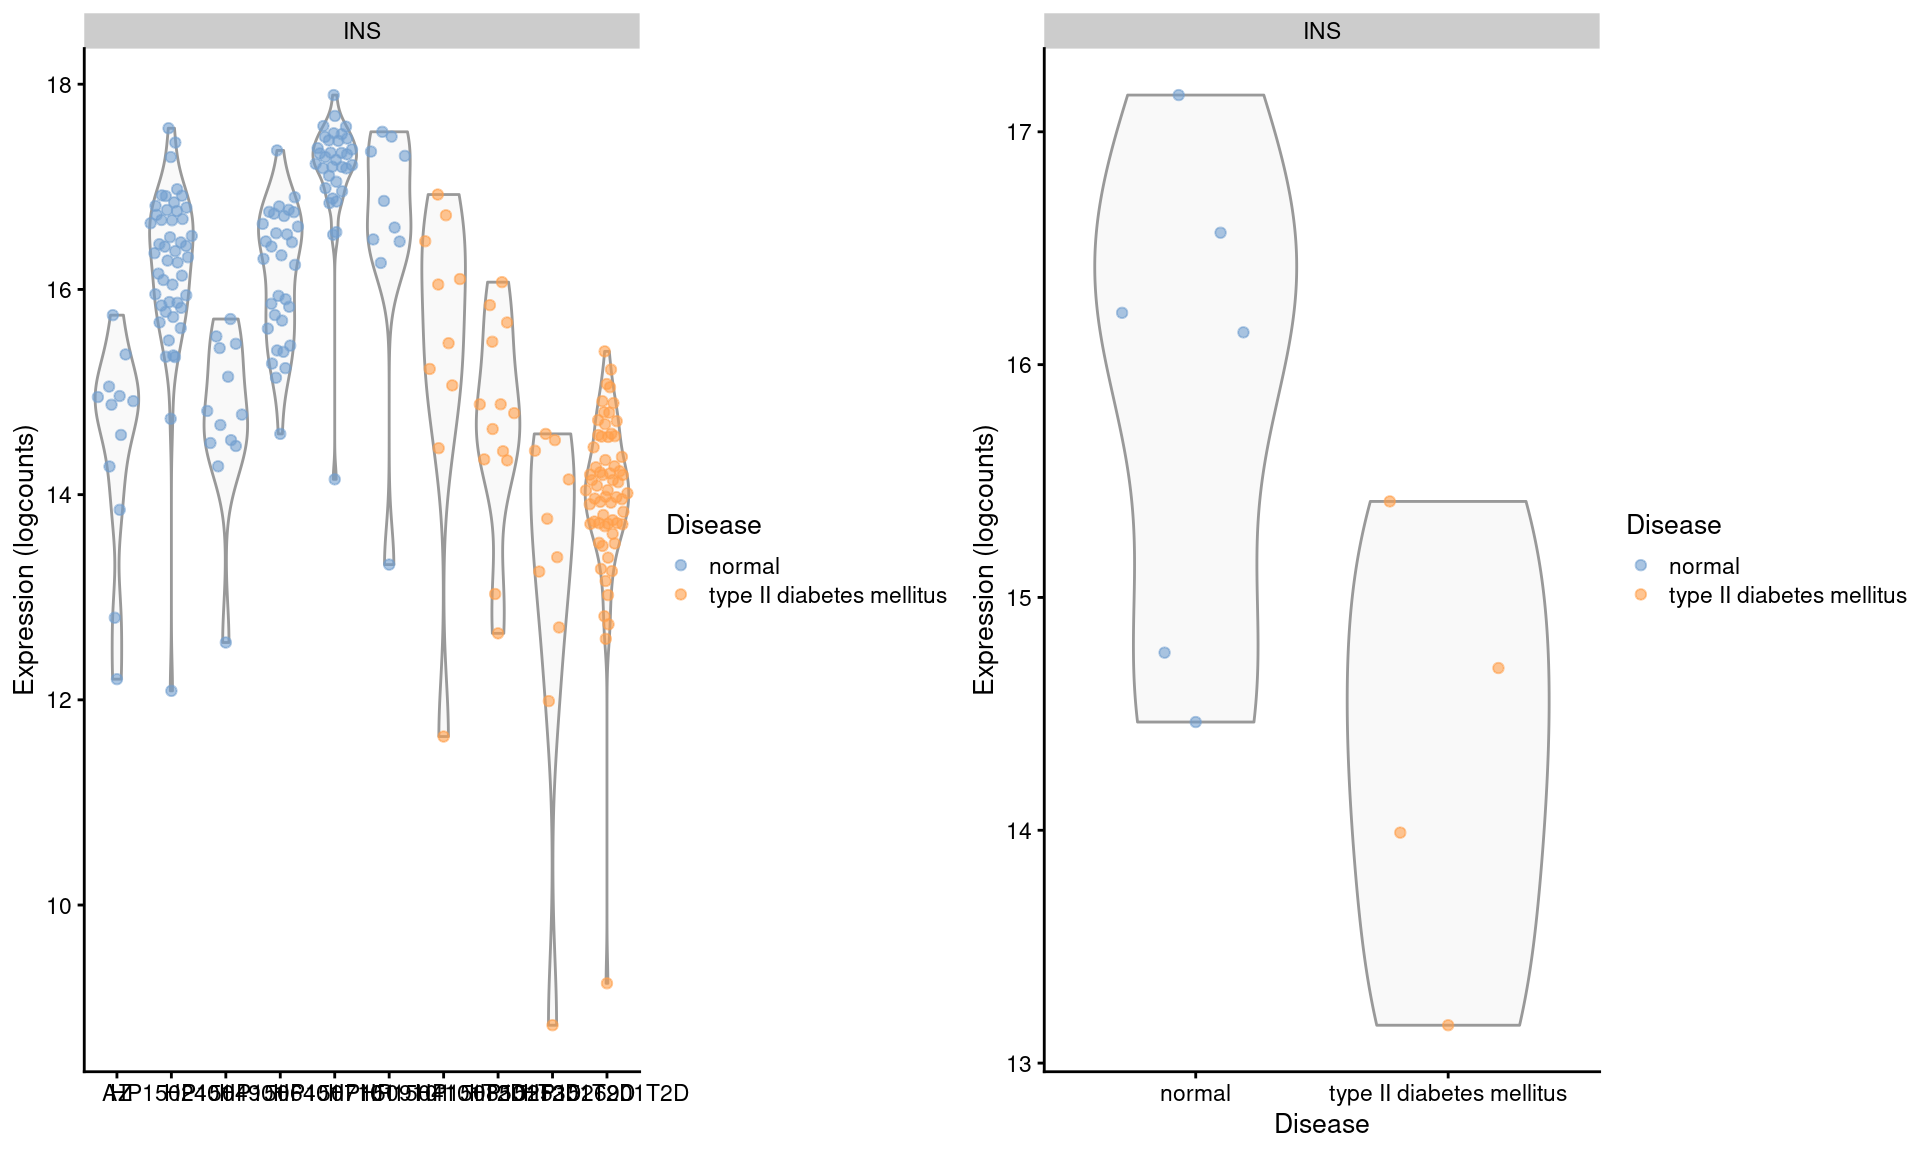 Distribution of log-expression values for _INS_ in beta cells across donors in the Segerstolpe pancreas dataset. Each point represents a cell in each donor (left) or the average of all cells in each donor (right), and is colored according to disease status of the donor.